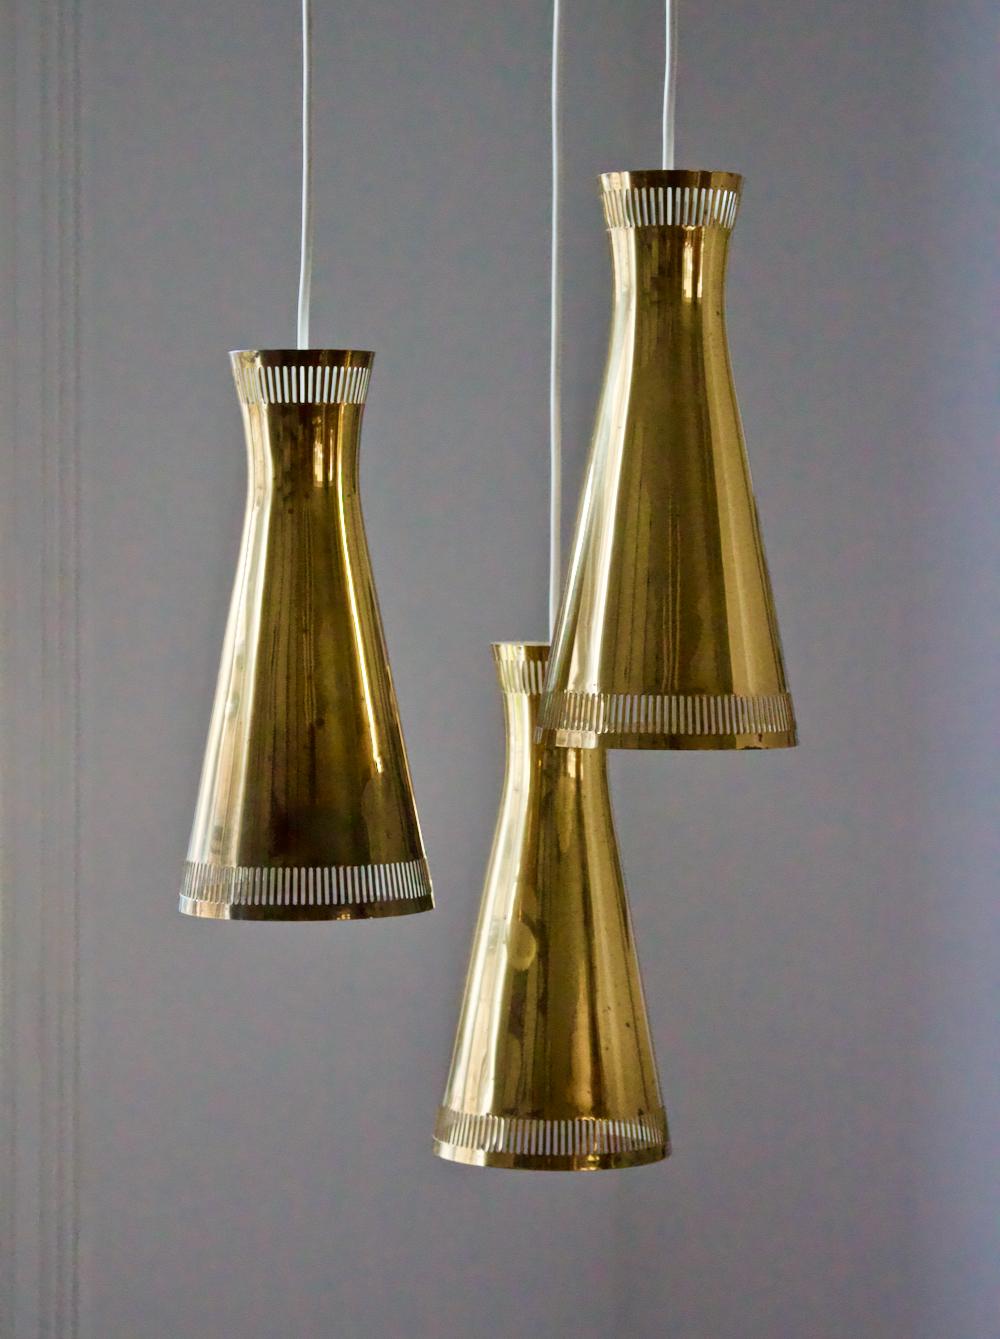 Brass chandelier, for Itsu, Finland. Mid-20th century.

A high-quality cascading chandelier featuring three shades of polished brass - white on the inside - arranged at different heights. The original ceiling canopy is in place and the fixture has